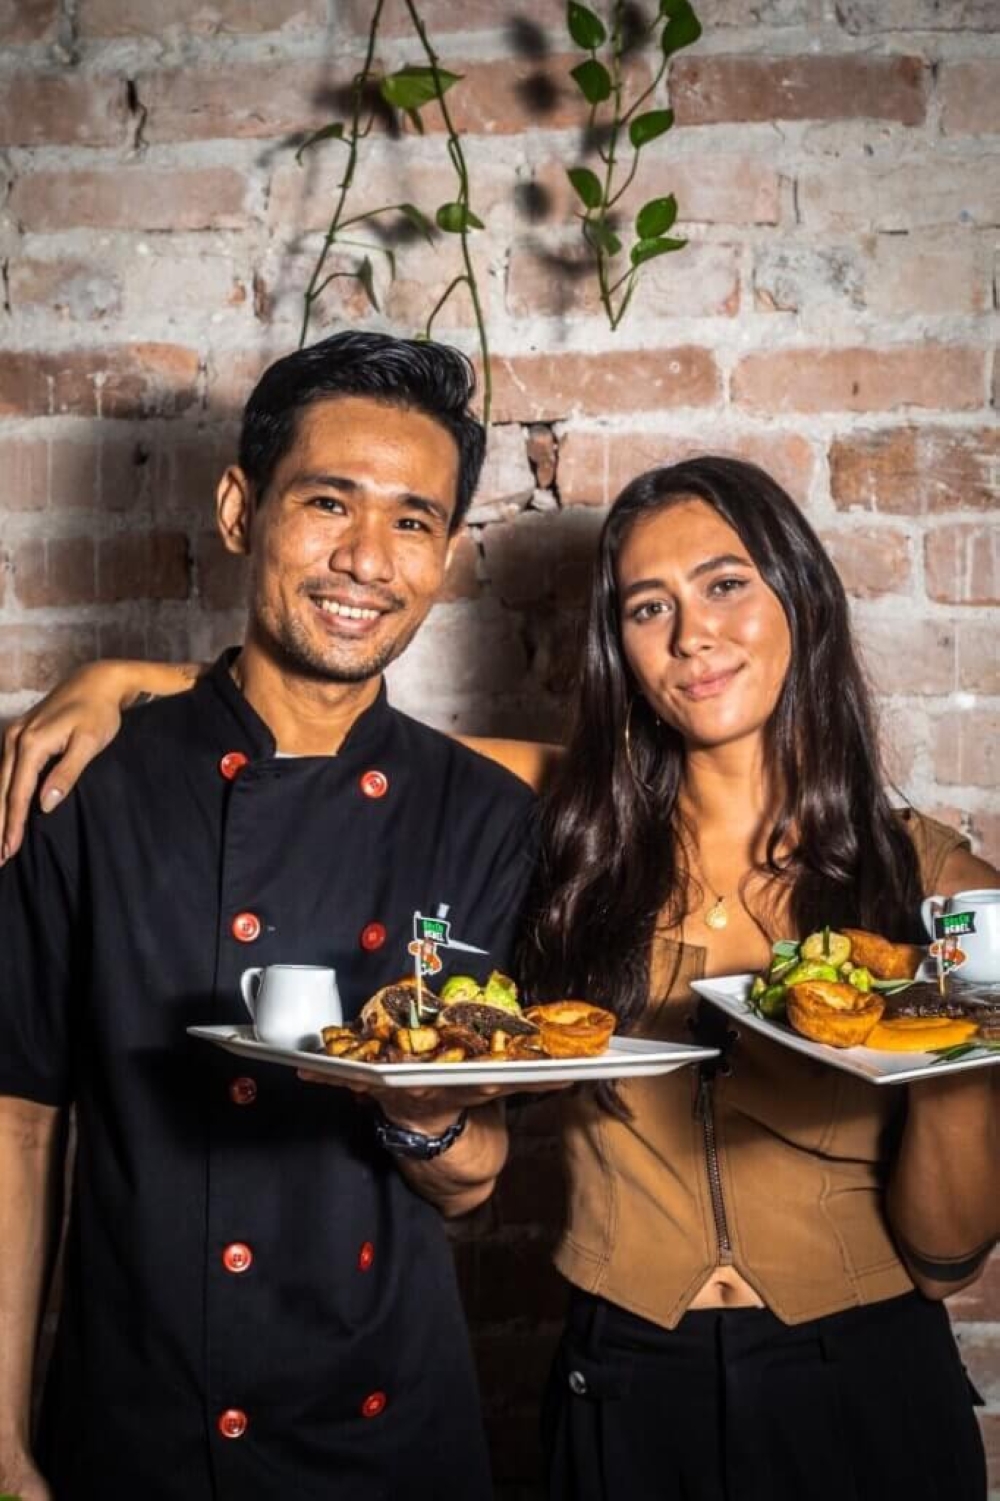 The Hungry Tapir co-founder Makissa Sophia Smeeton (right) and her head chef, Hein Htet Shein, presenting the plant-based ‘Ay-am’ Geprek Burger. — Picture courtesy of Makissa Sophia Smeeton